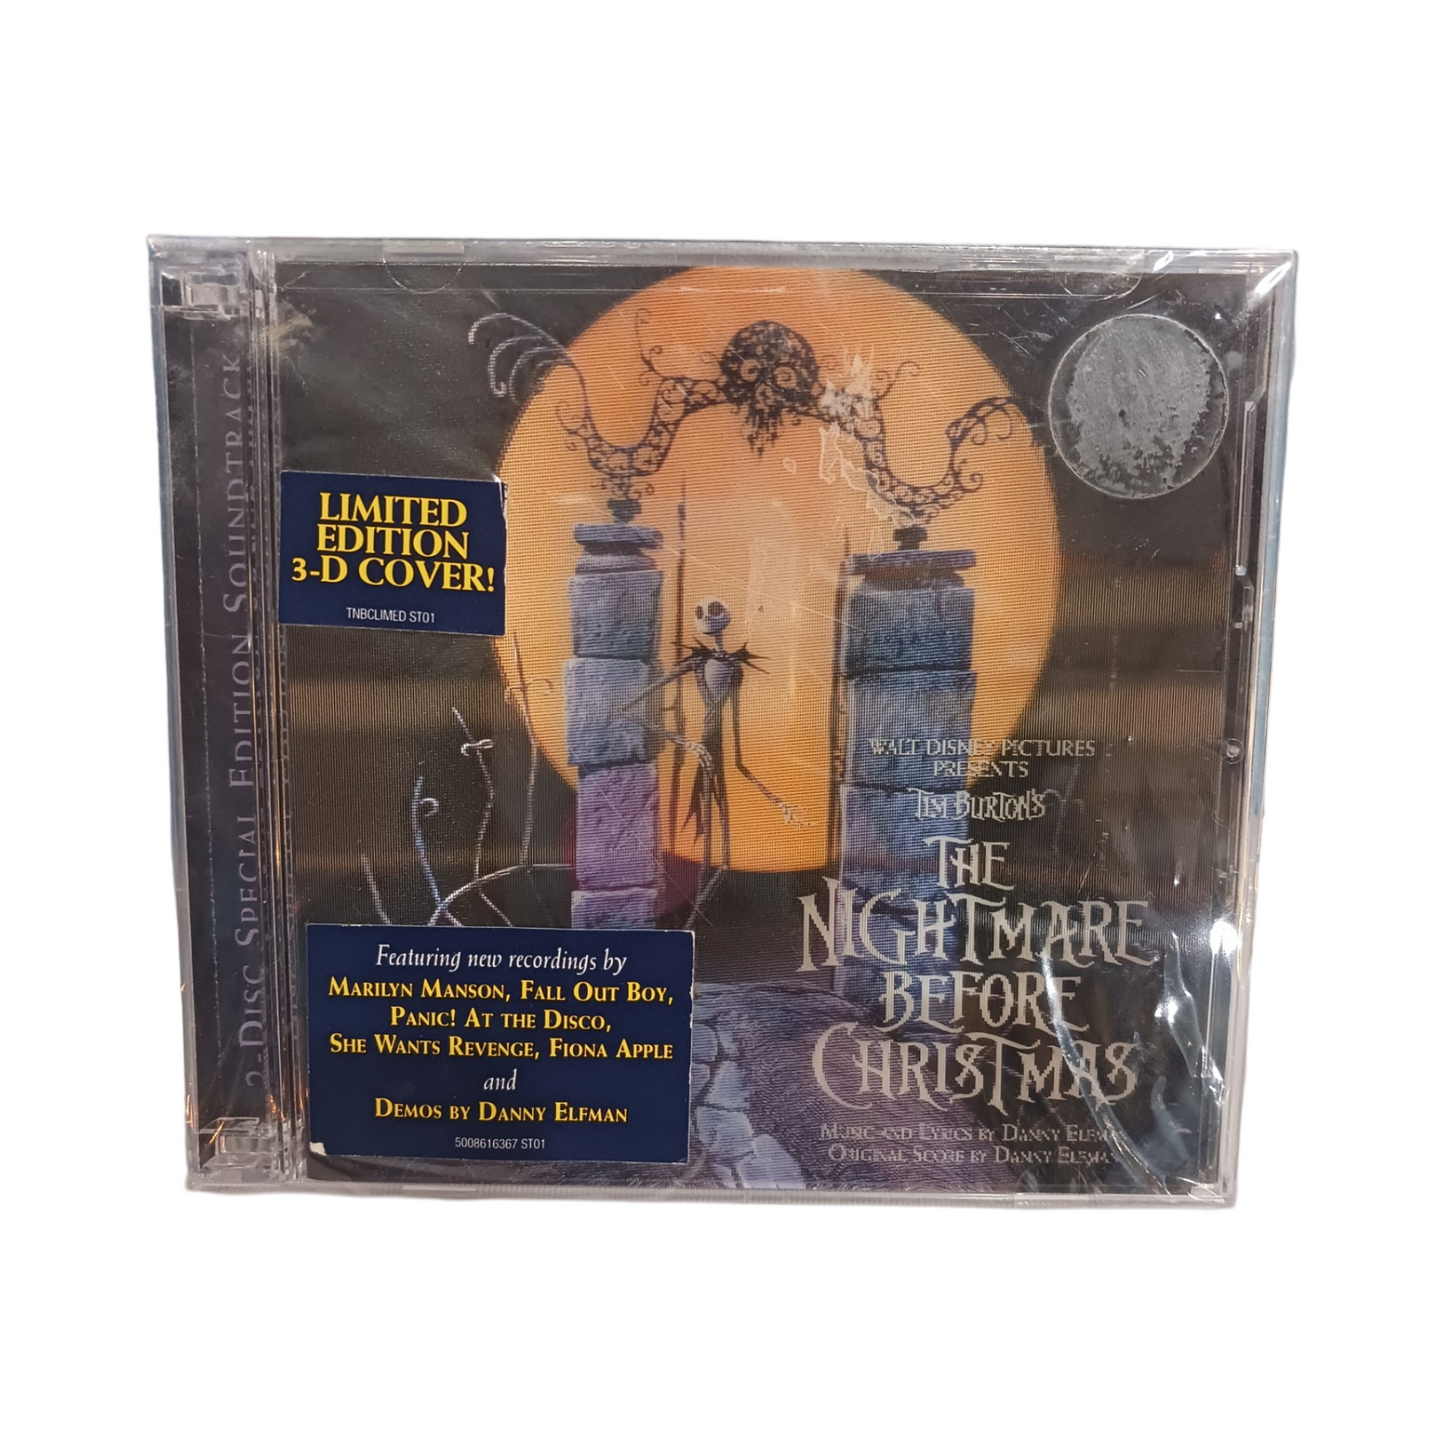 The Nightmare Before Christmas Soundtrack CD, Limited Edition 3D Cover, Features New Recordings